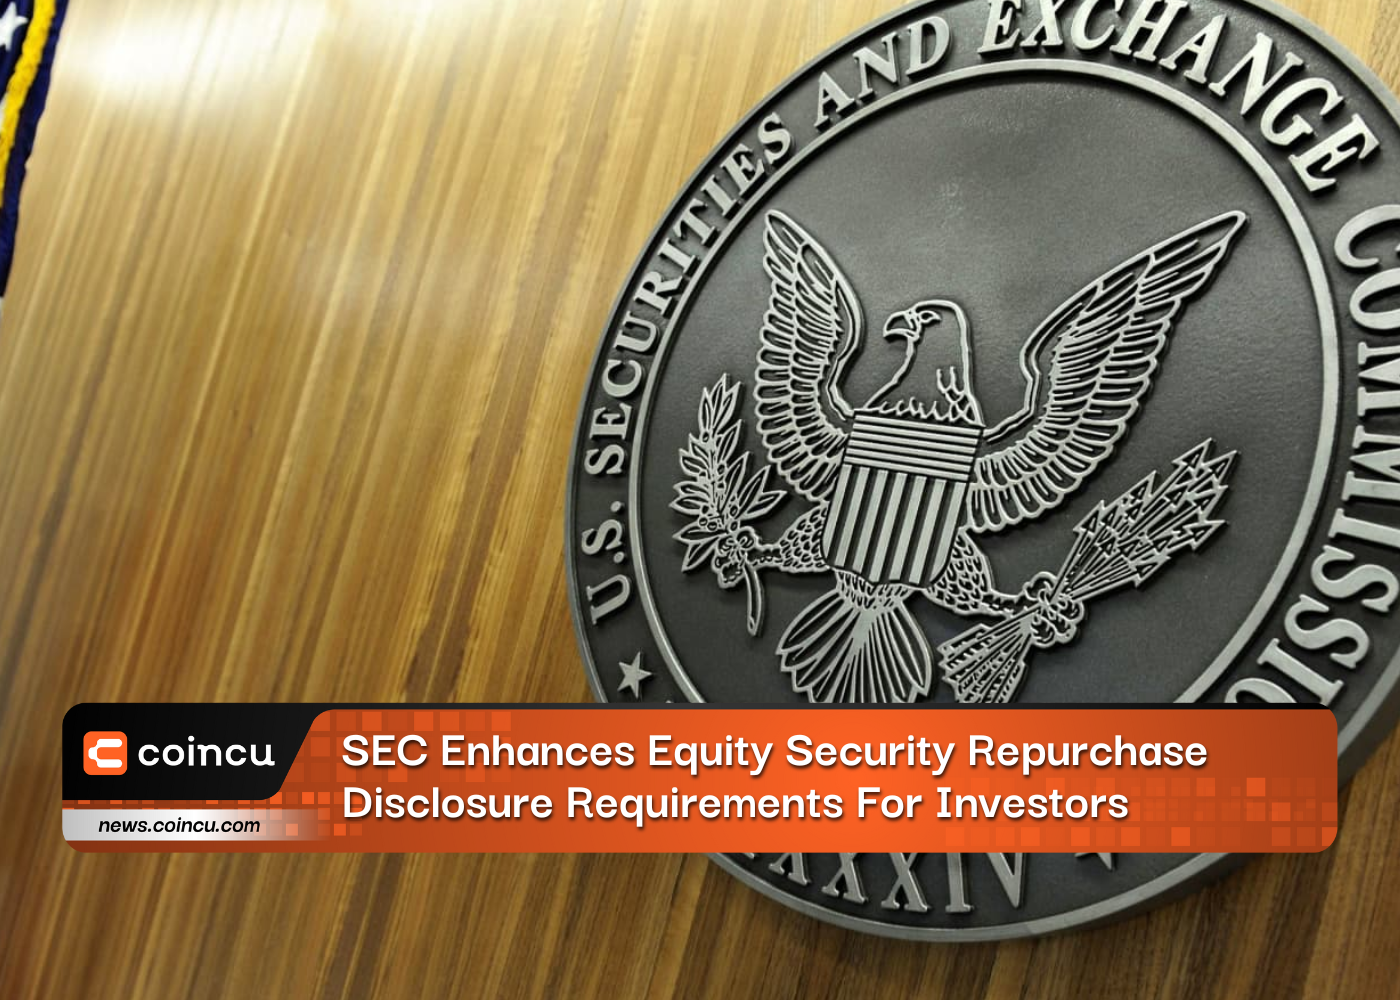 SEC Enhances Equity Security Repurchase Disclosure Requirements For Investors